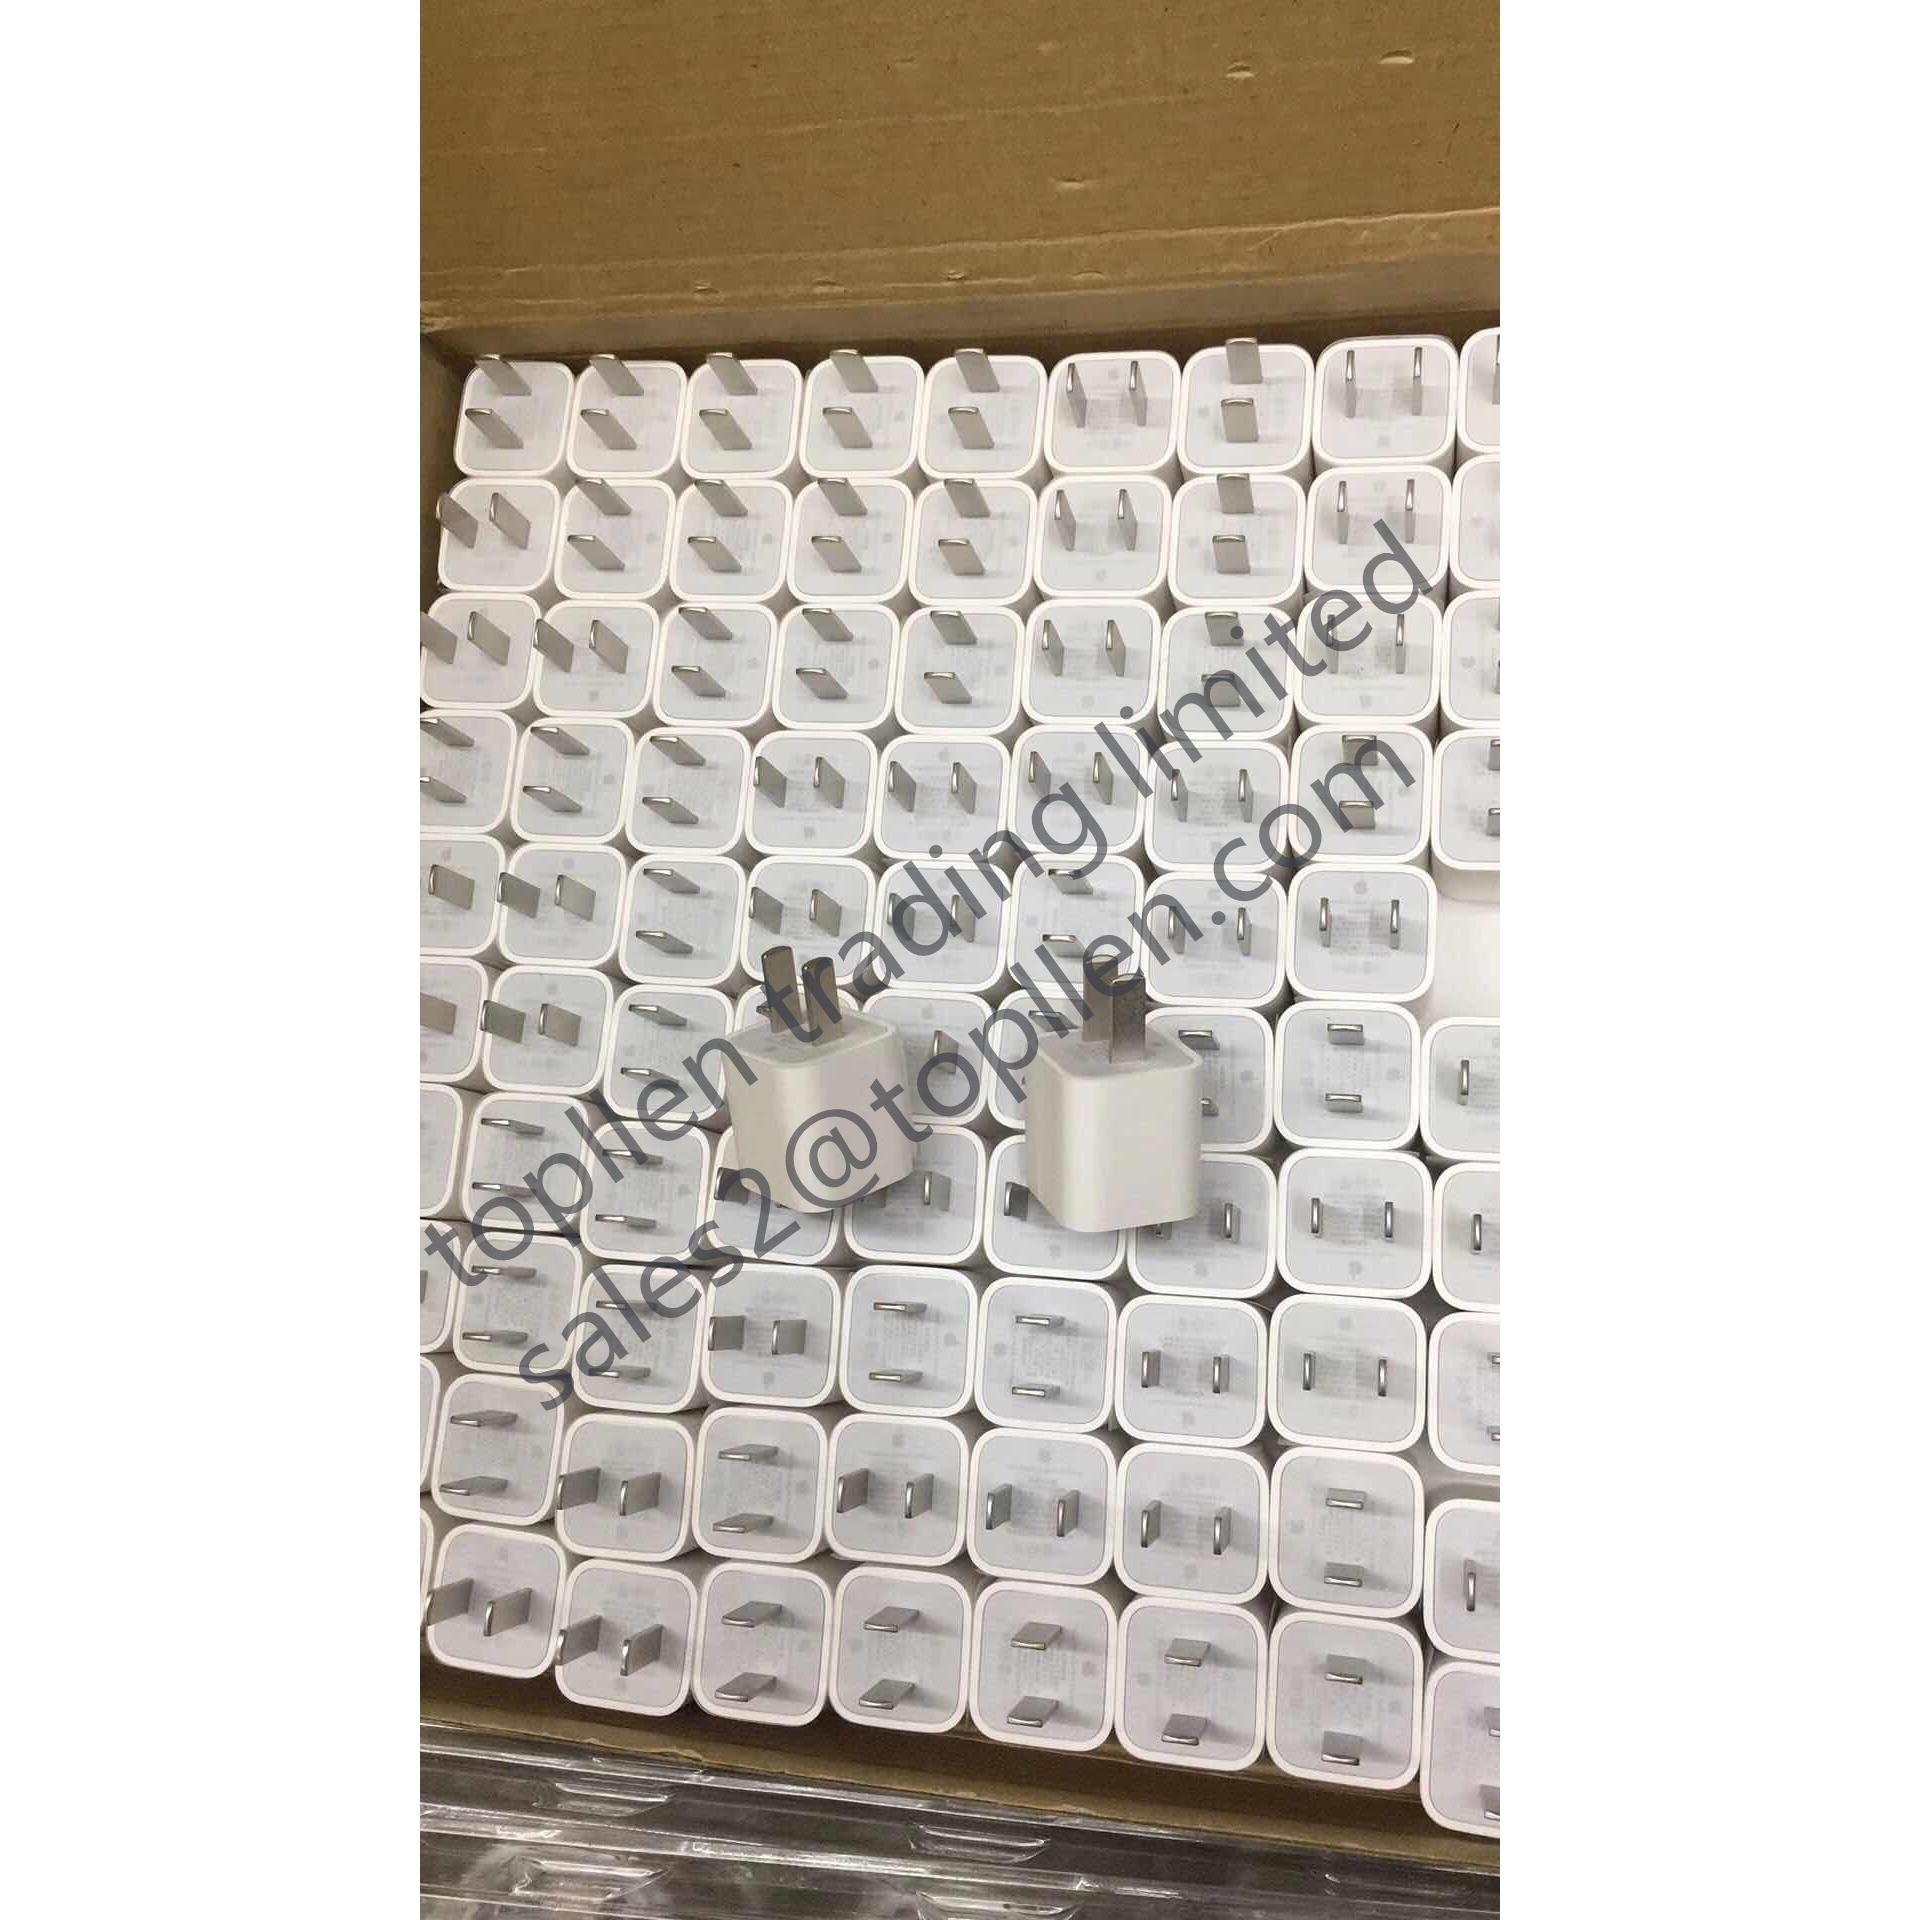 Apple Iphone 7 Charger Wholesale Suppliers